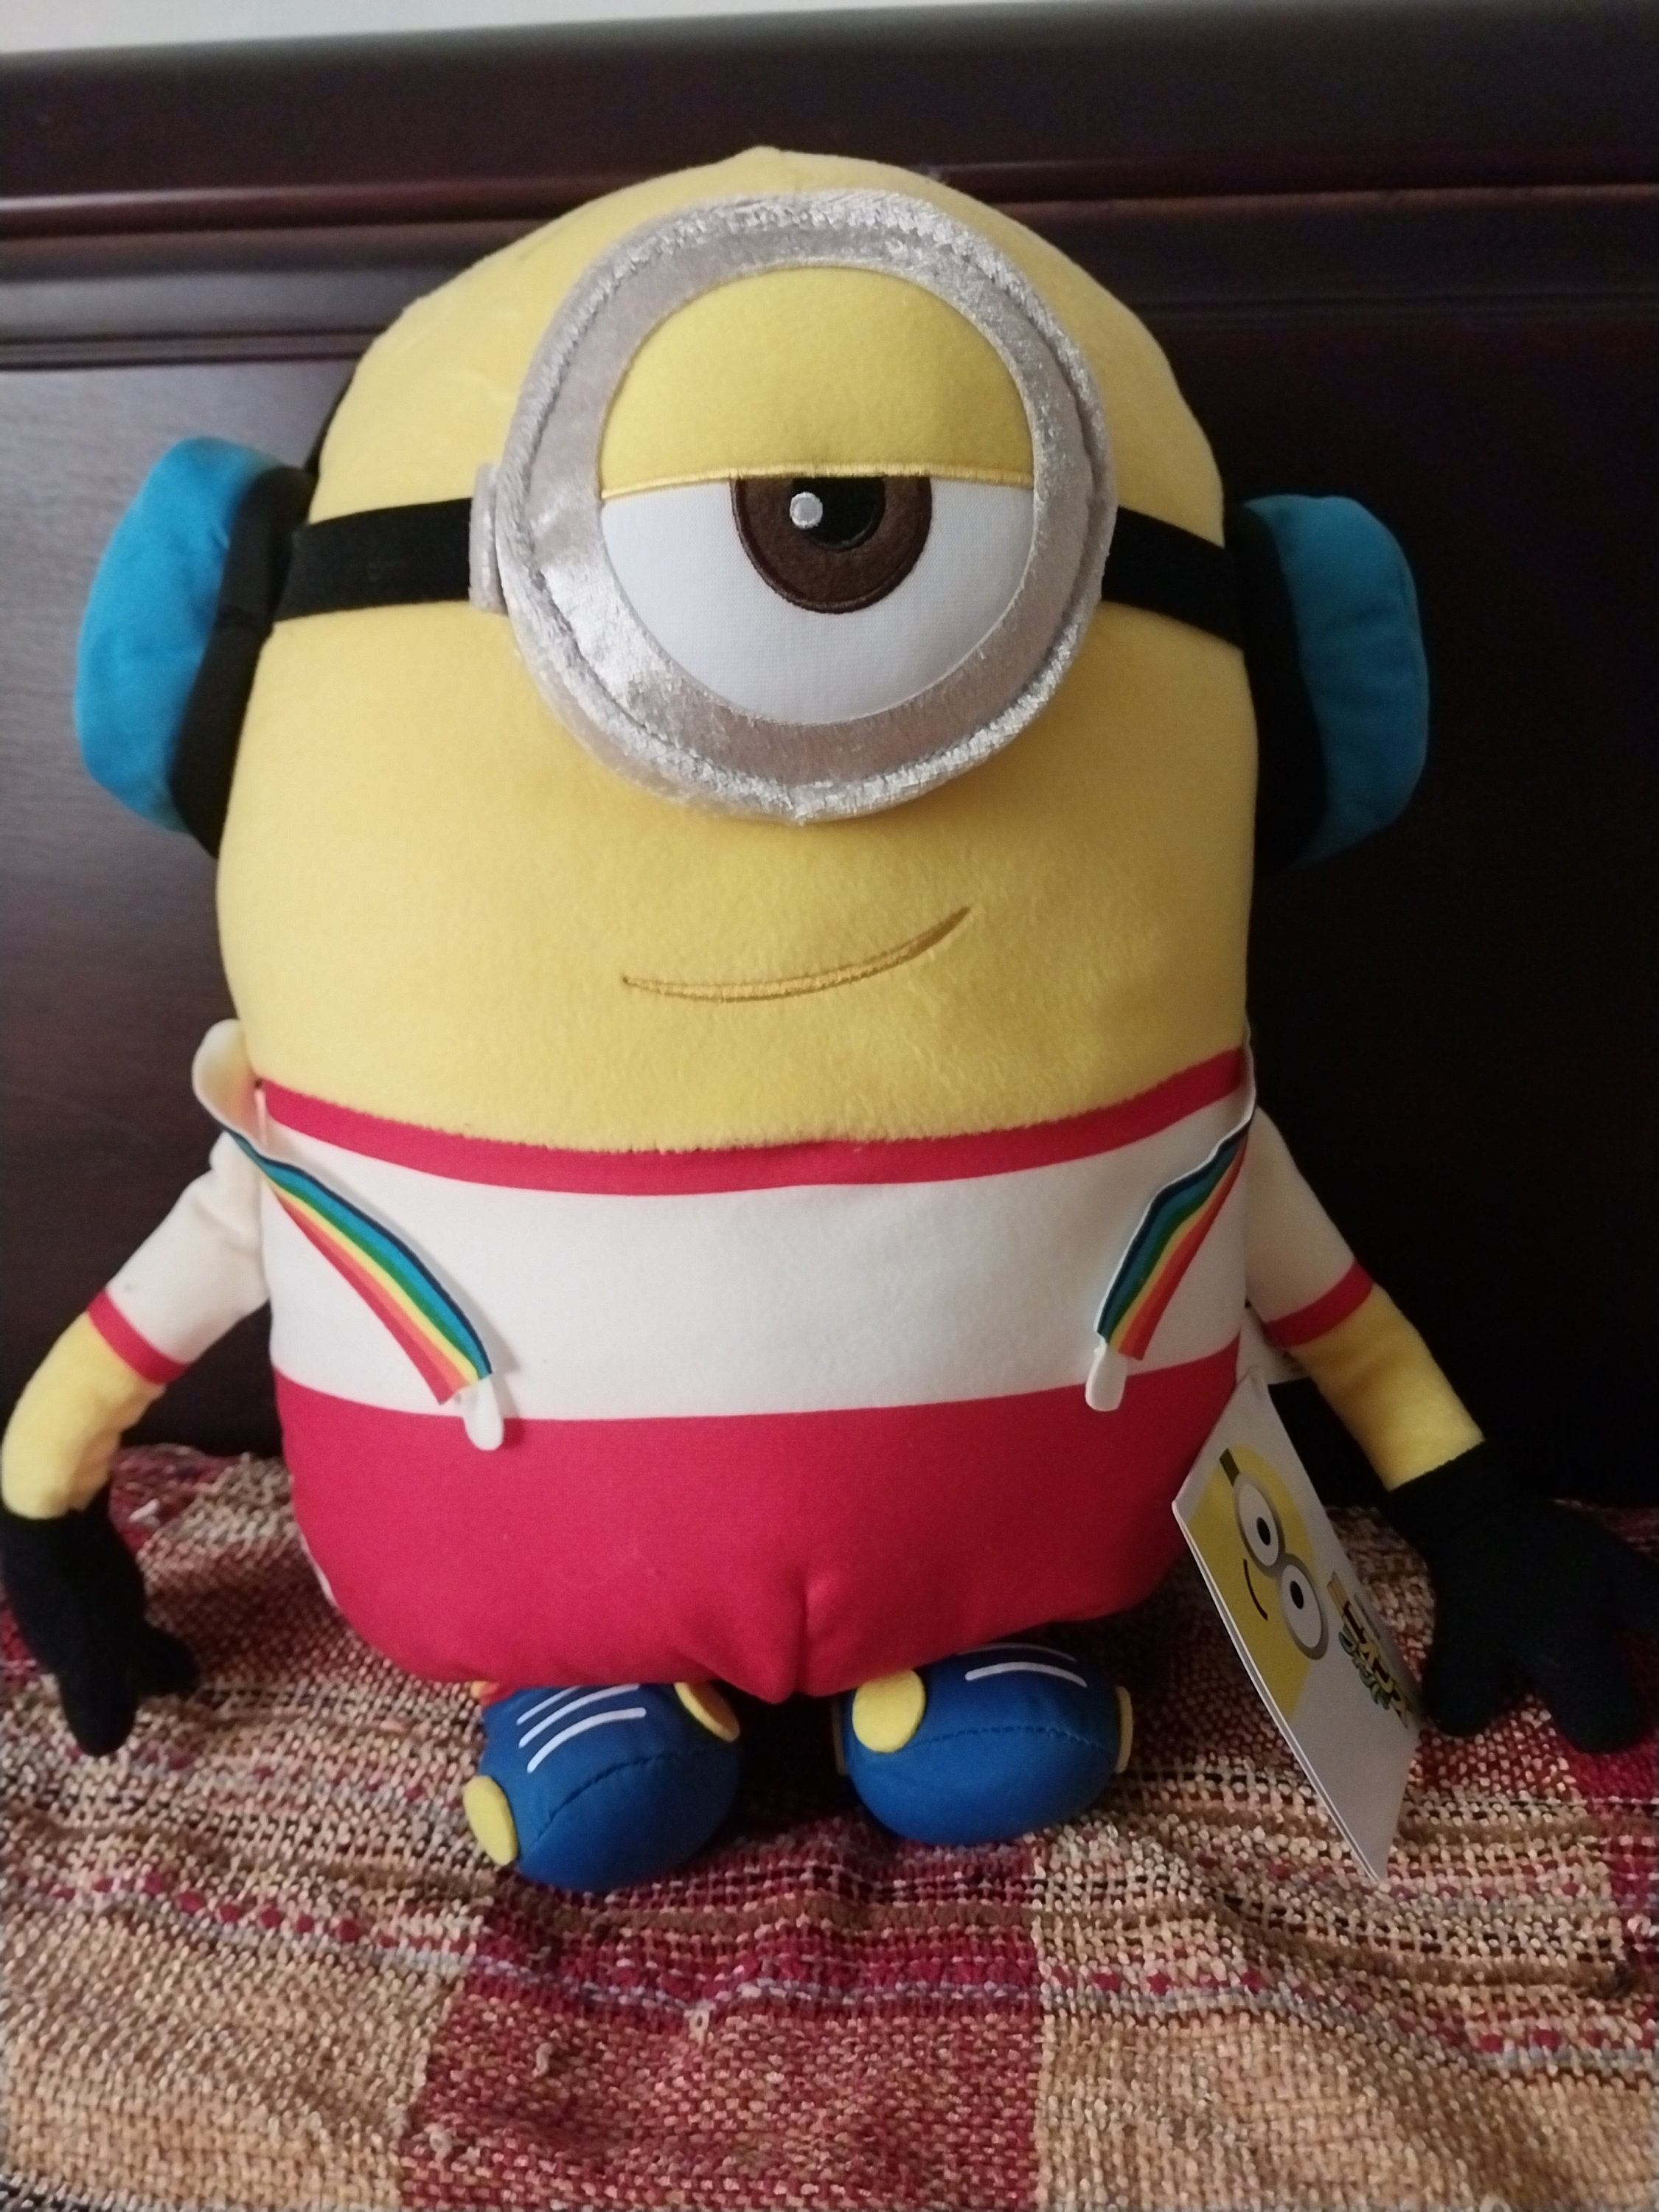 Despicable Me Minions Nylon Lunch Bag Zipper Lunchbox Carry Bag Buddies  Pink Inspired by You.